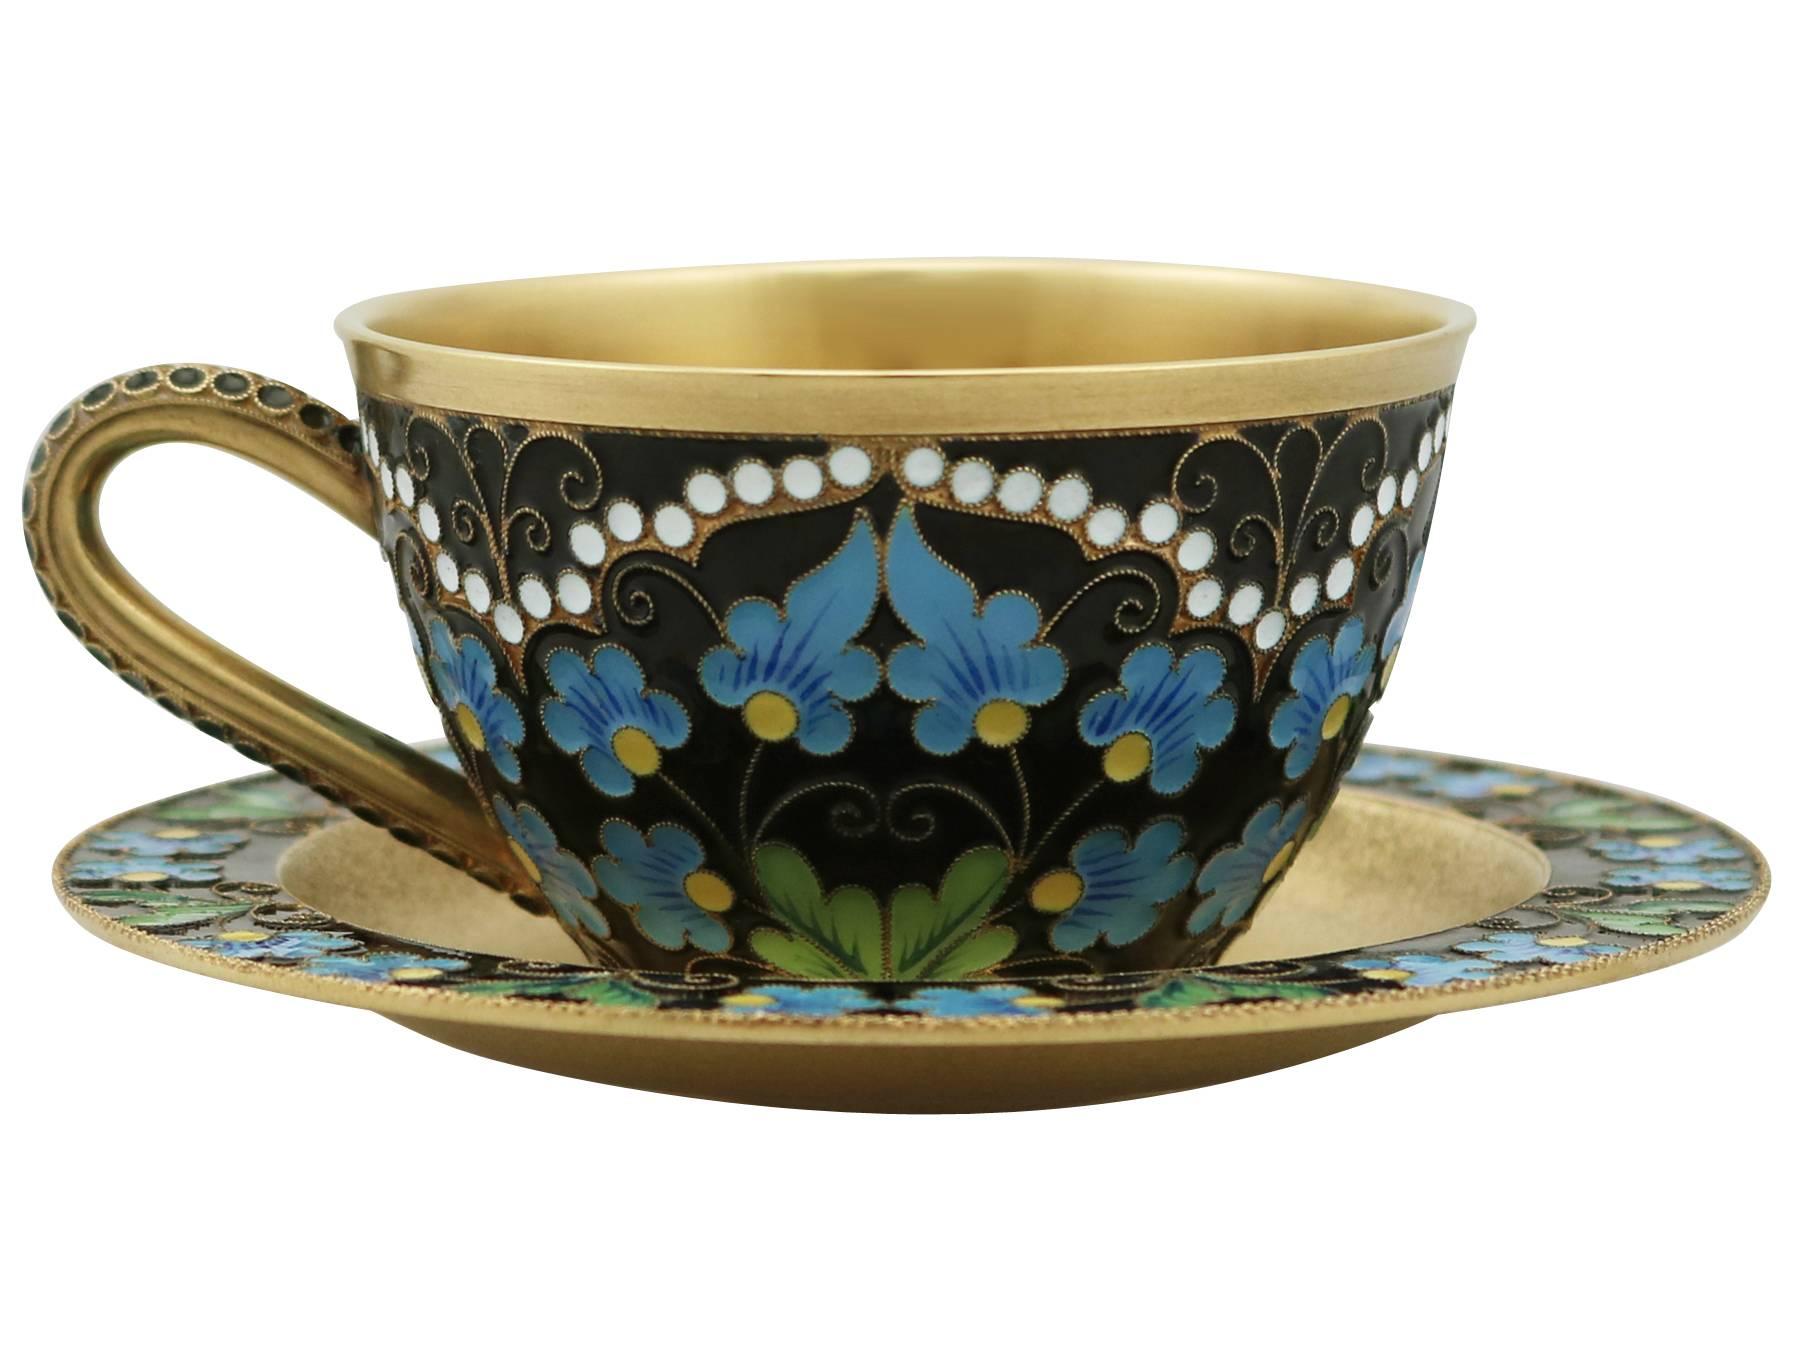 An exceptional, fine and impressive vintage Russian silver and polychrome cloisonné enamel tea cups and saucers set; an addition to our range of drinks related silverware.

These exceptional vintage Russian silver gilt tea cups and saucers have a